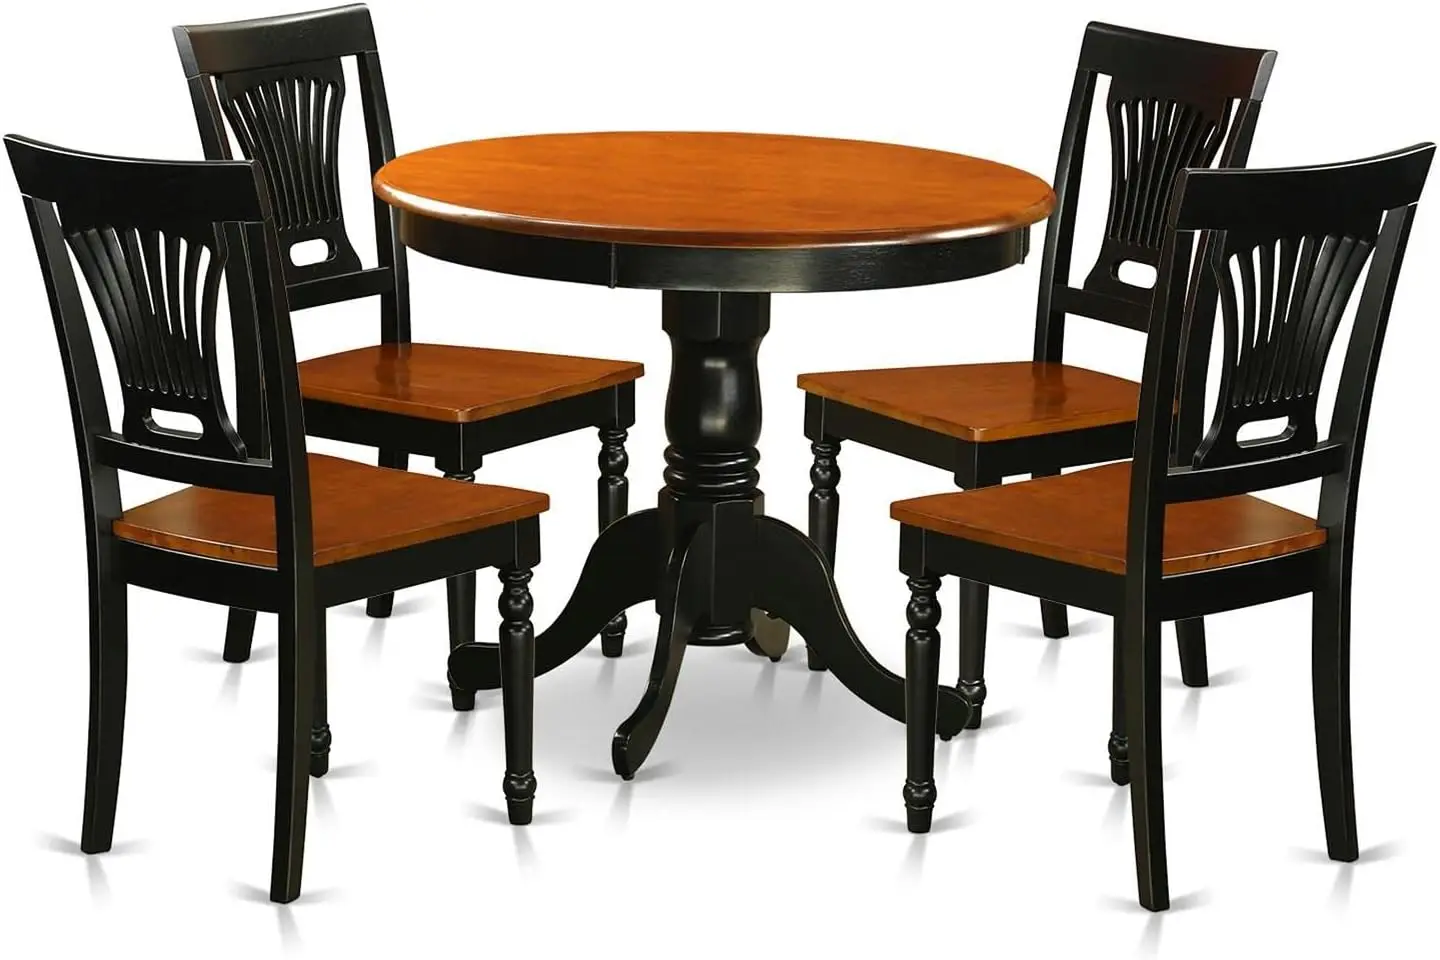 

East West Furniture ANPL5-BLK-W 5 Piece Kitchen Set Includes a Round Dining Room Table with Pedestal and 4 Solid Wood Seat